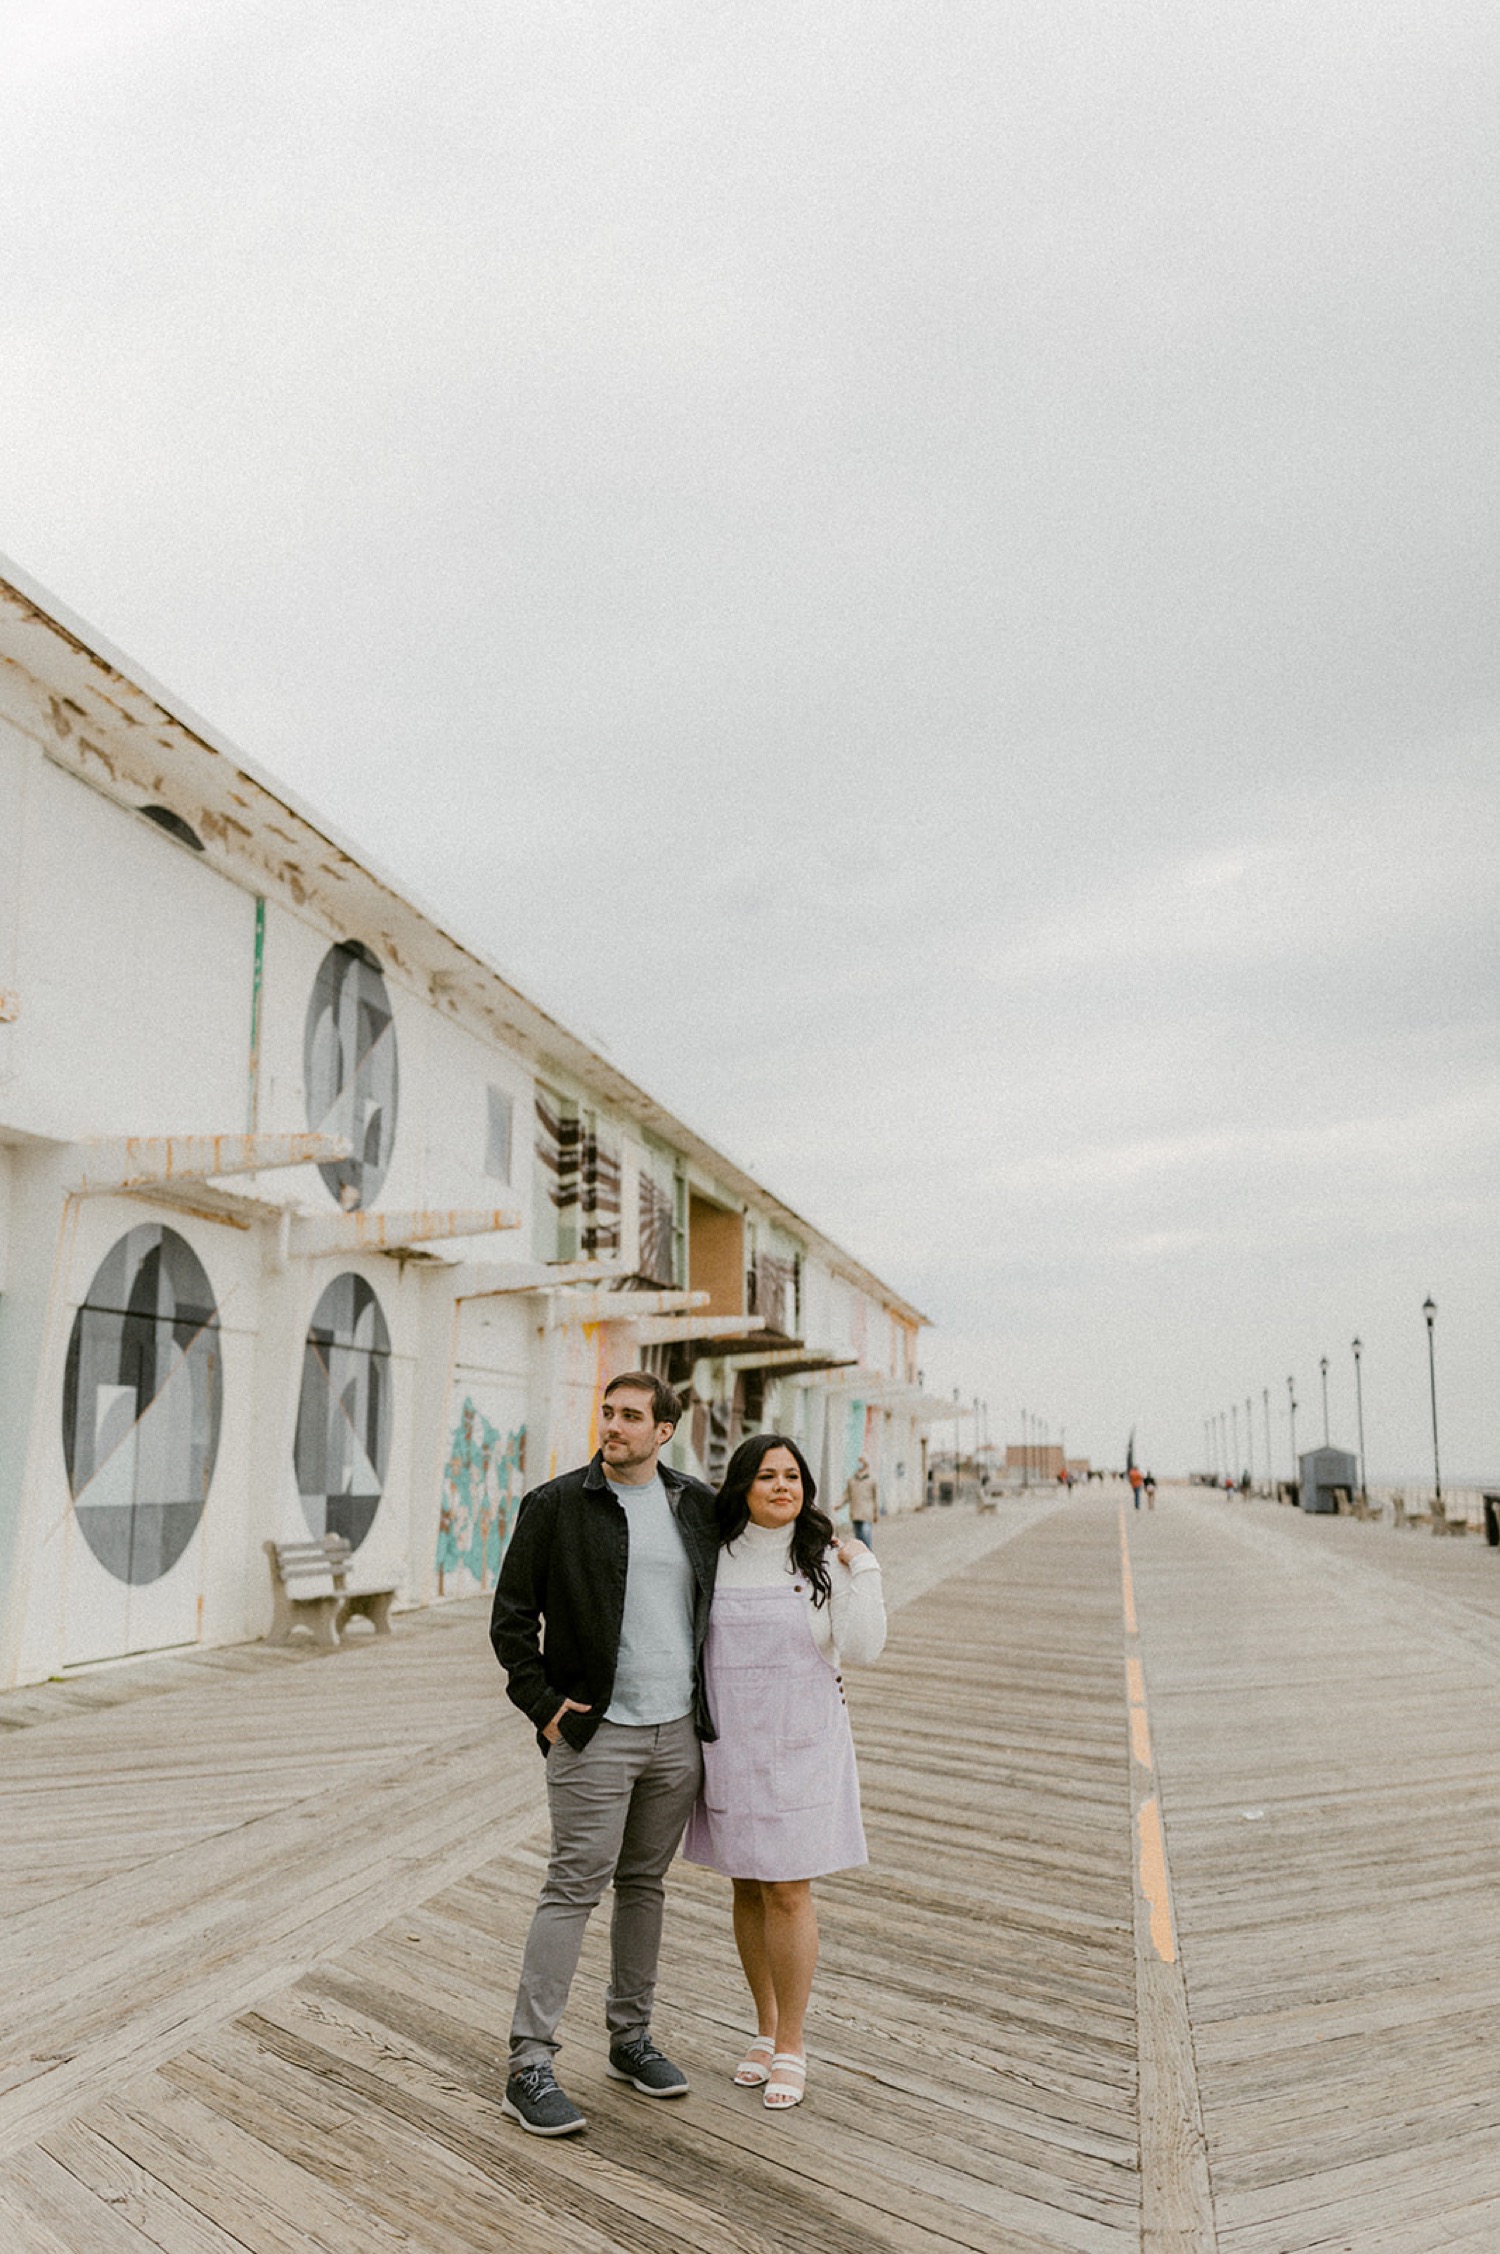 couple on boardwalk with colorful murals in the background